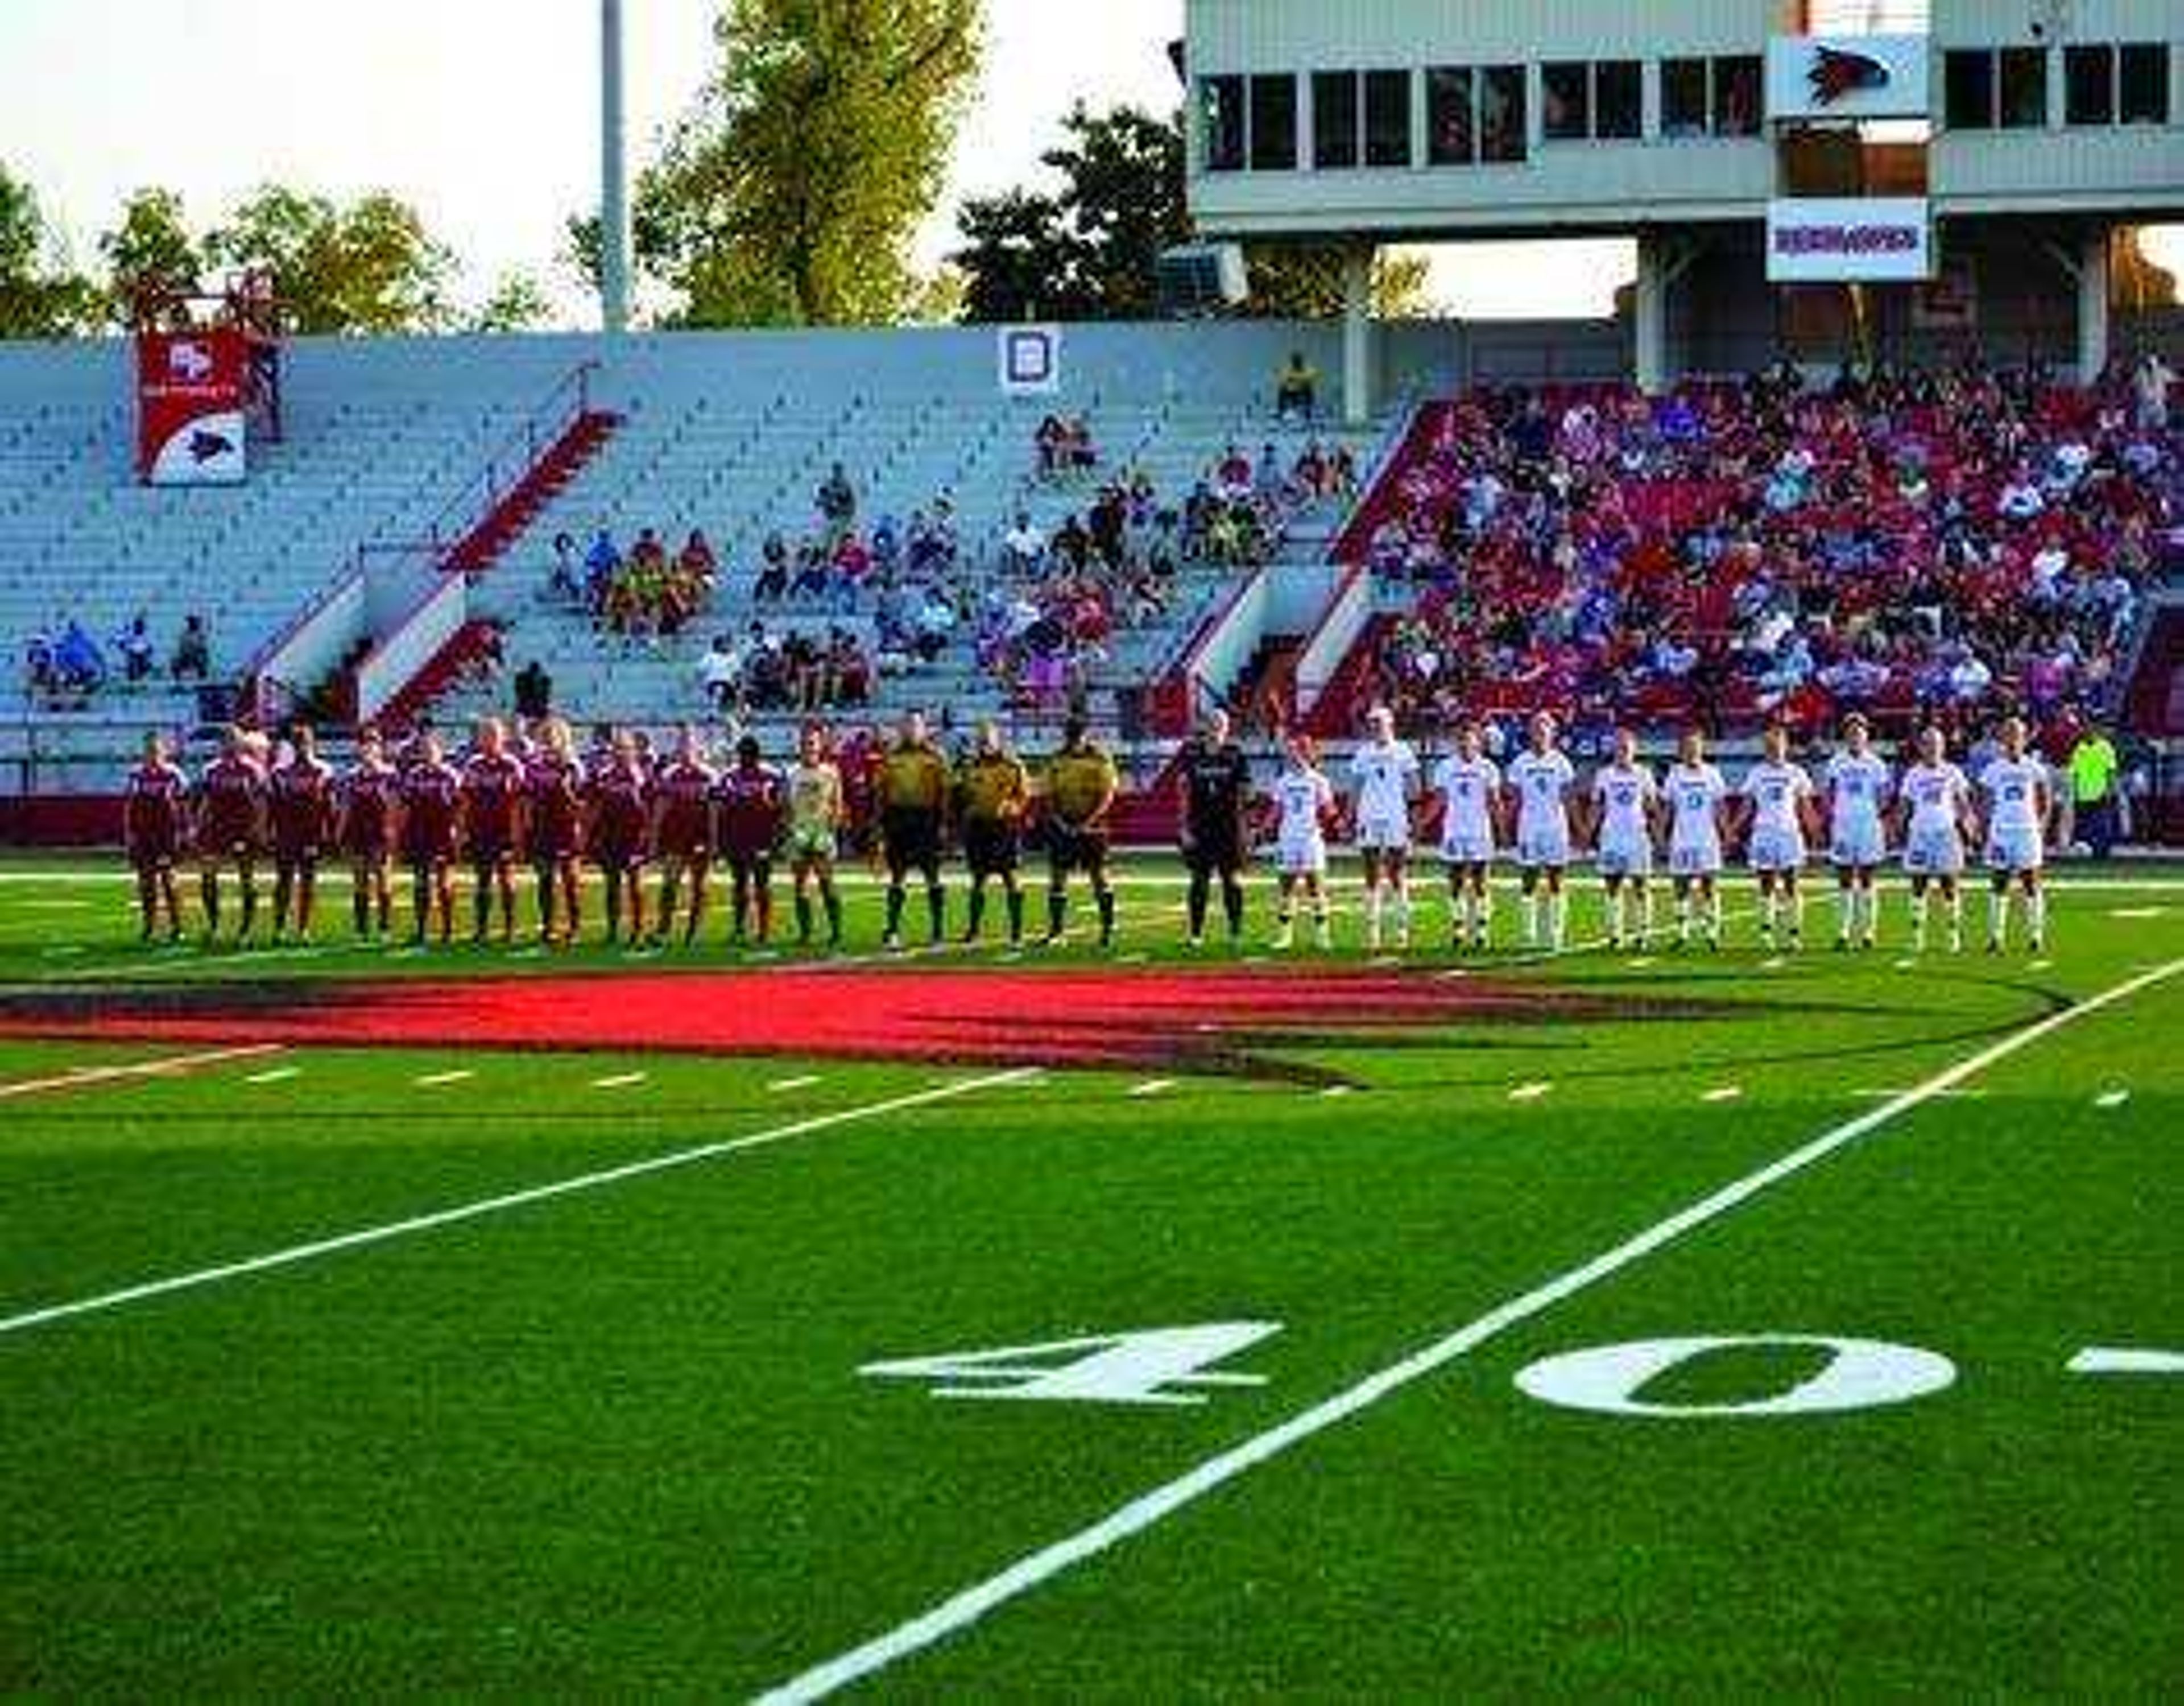 The Southeast Missouri State women's soccer team before a game in 2013. The team added five players to the roster on National Signing Day, which was Feb. 4. Submitted photo